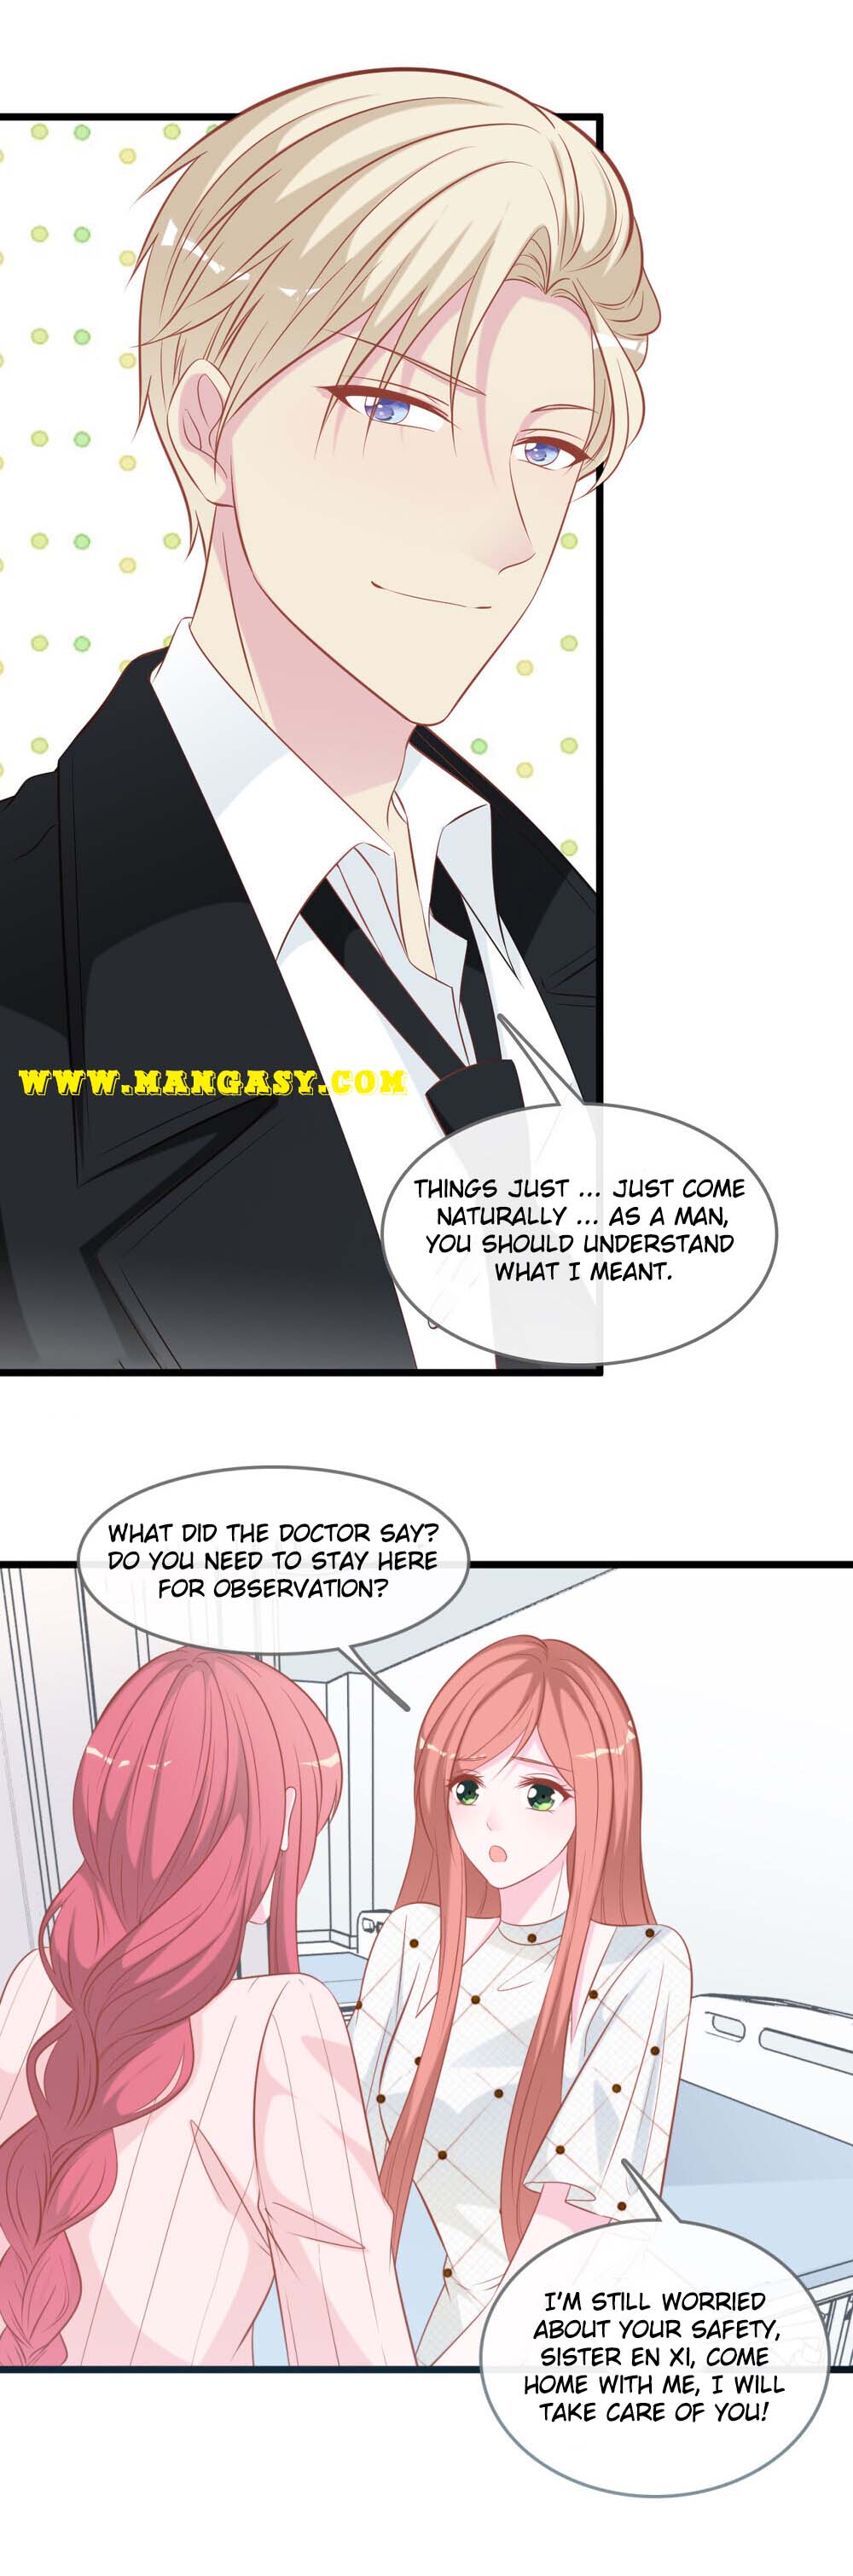 President Daddy Is Chasing You Chapter 135 - HolyManga.net